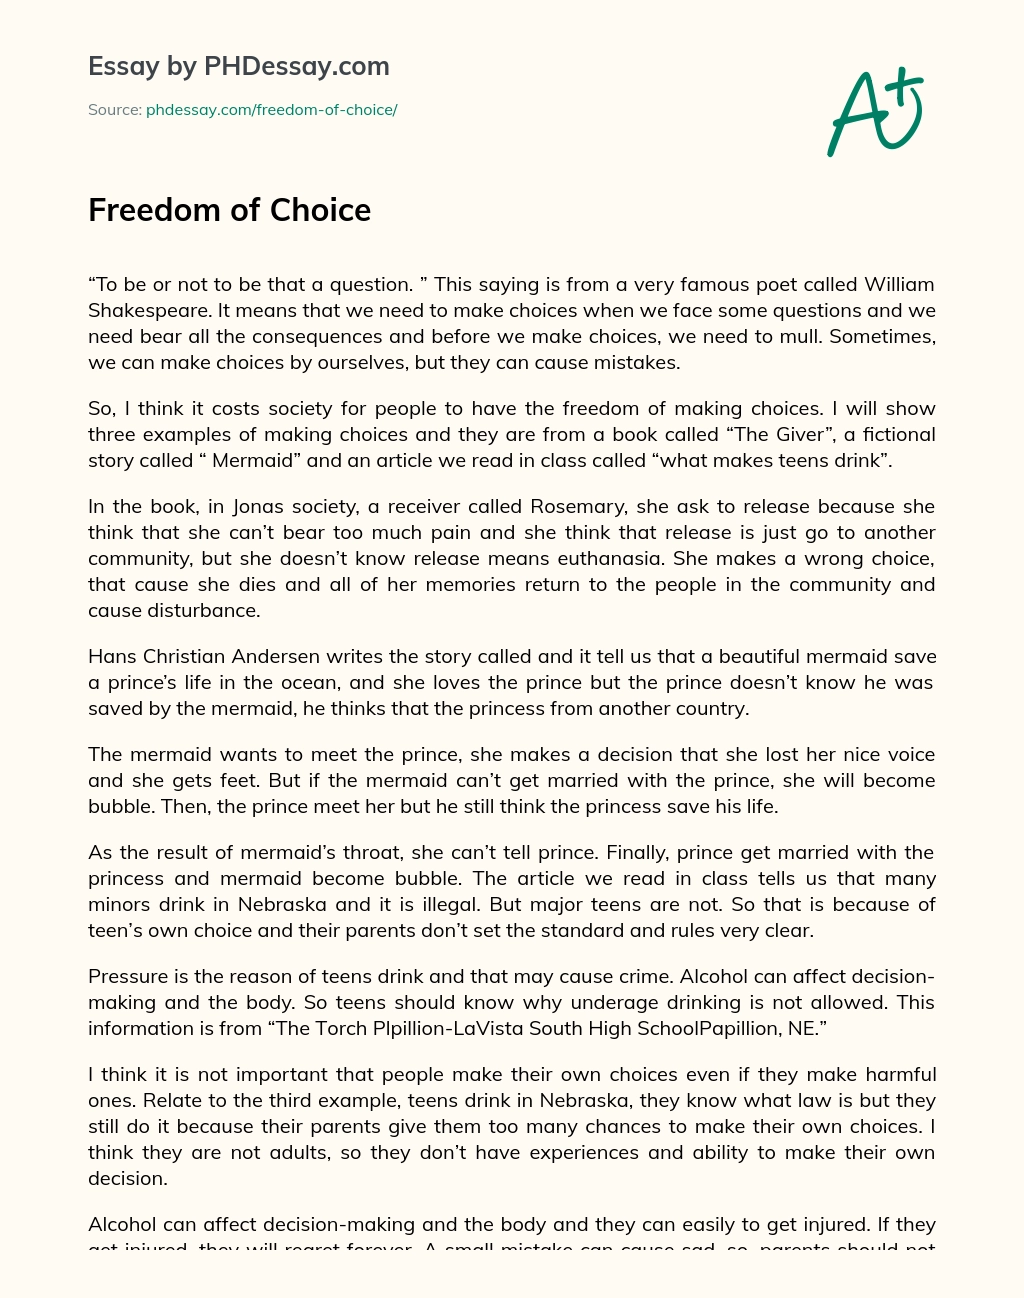 persuasive essay about freedom of speech